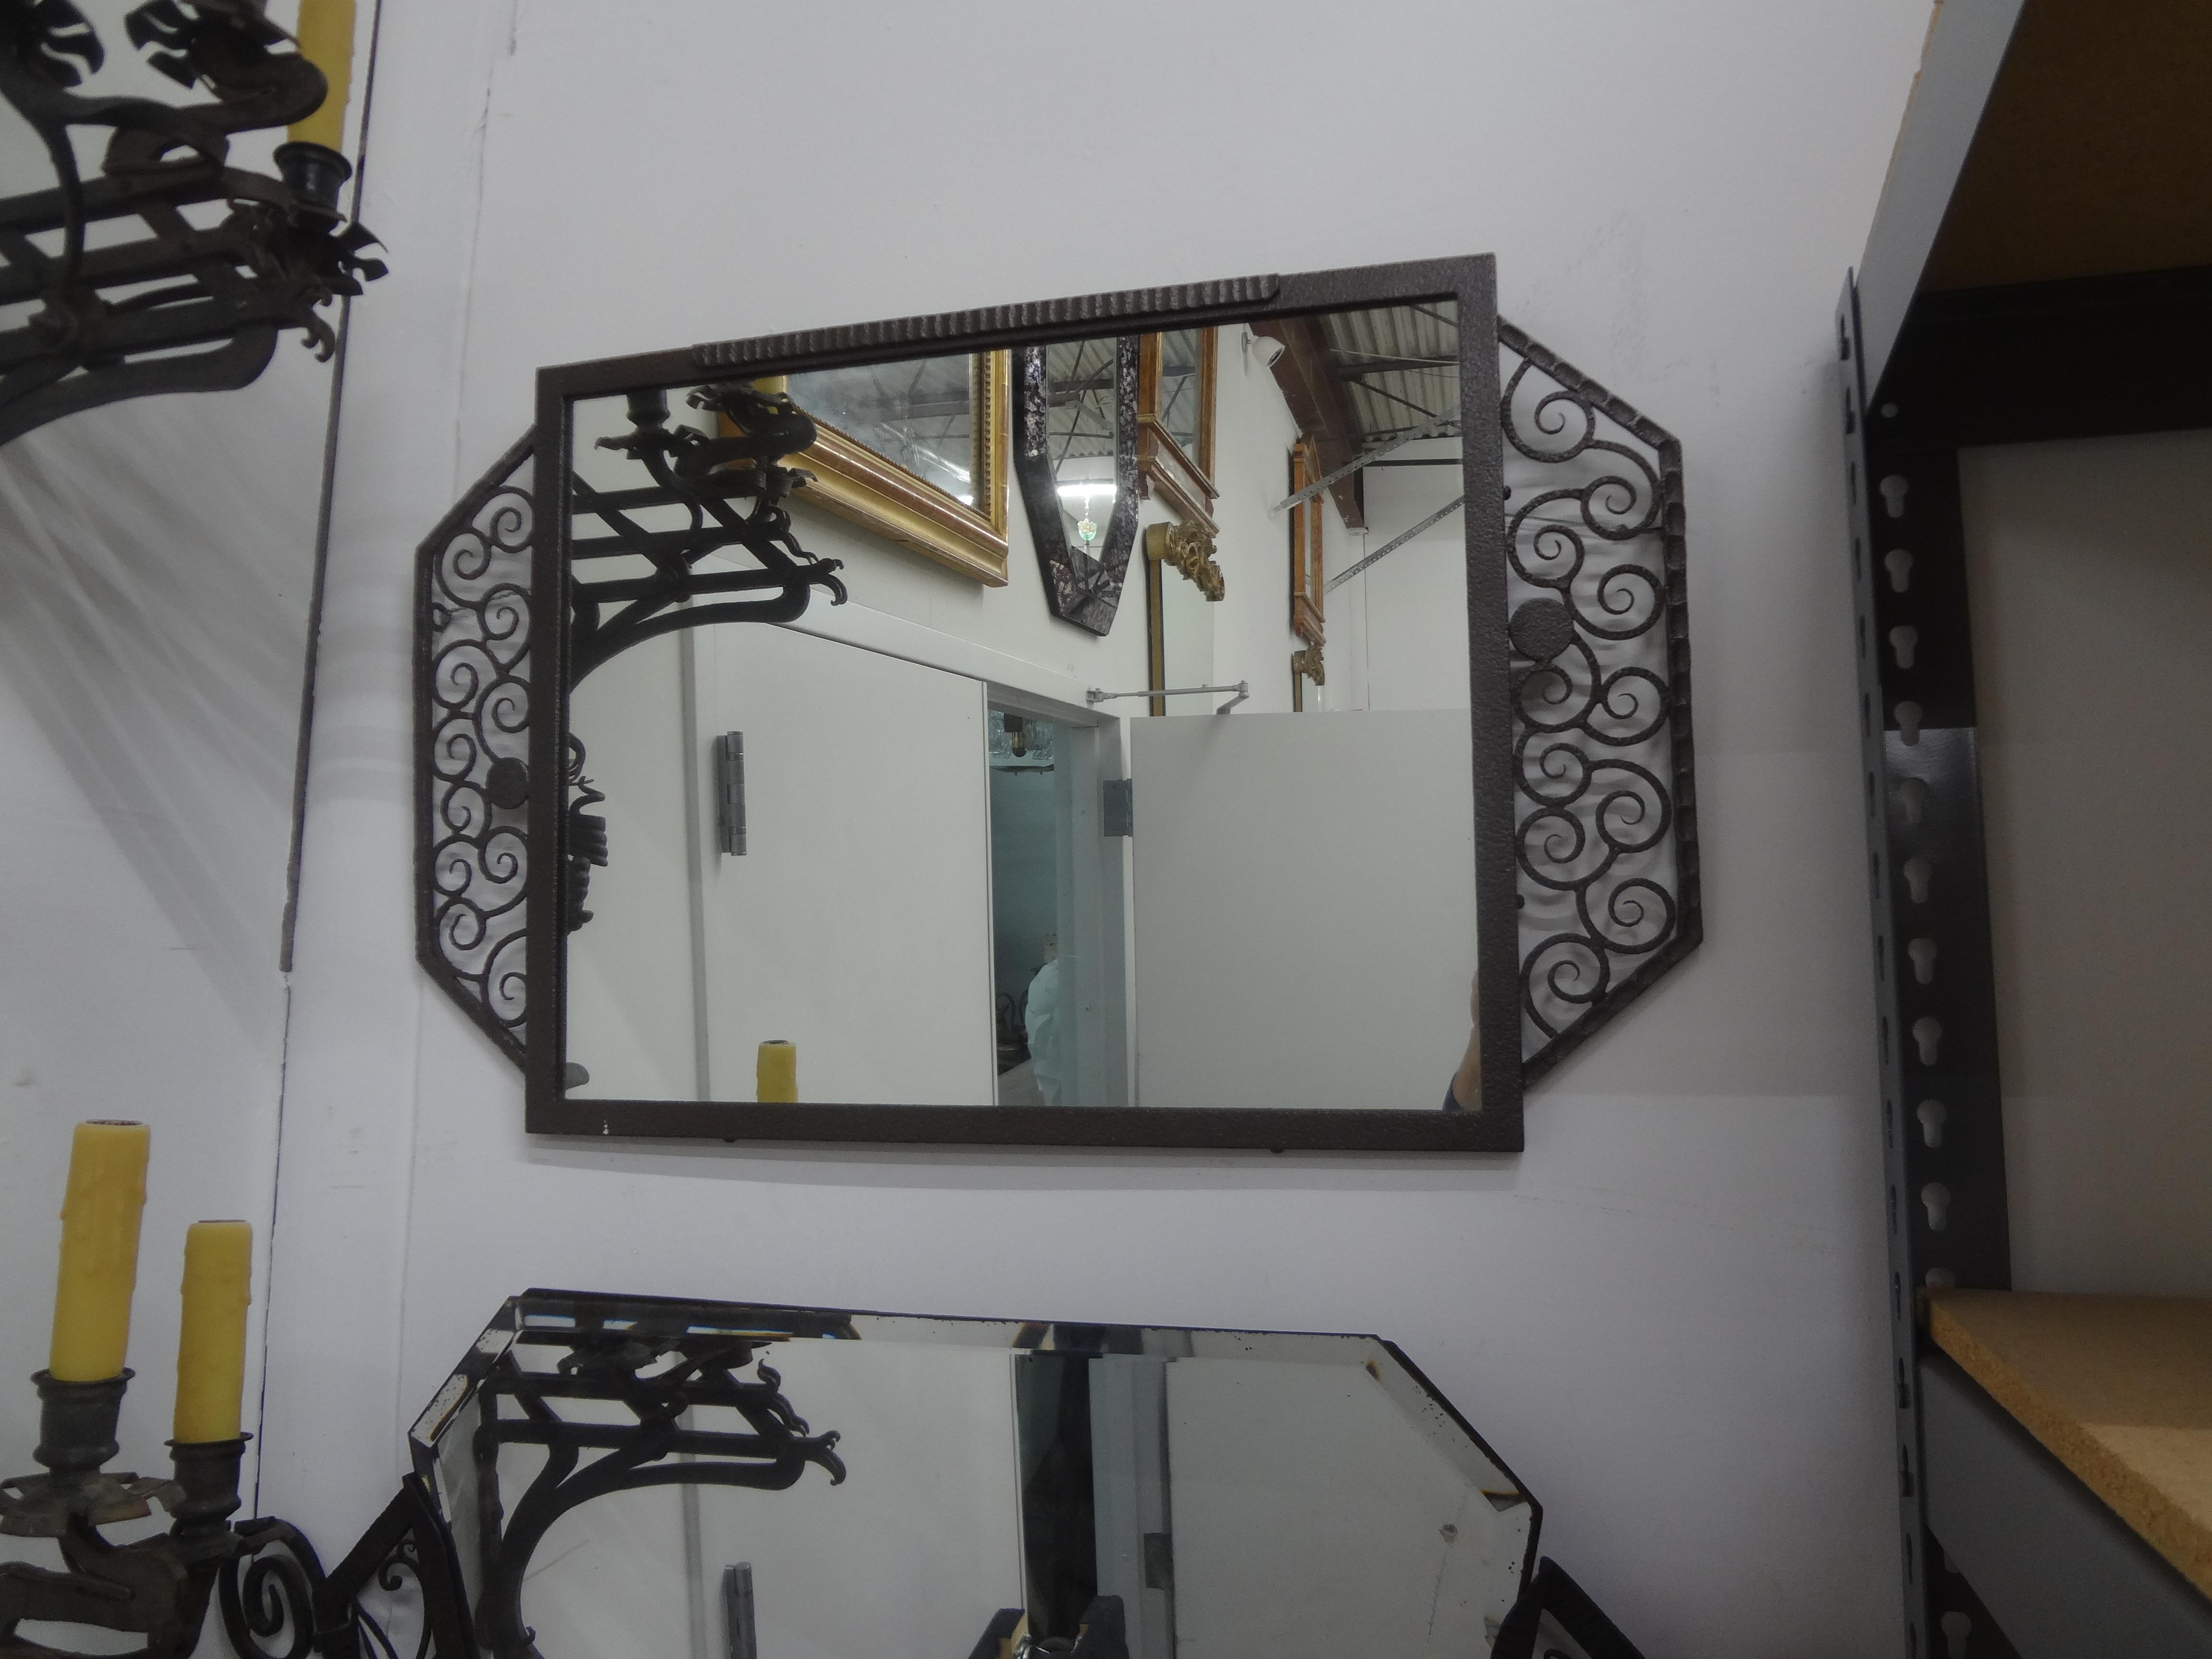 French Art Deco Wrought Iron Mirror.
Handsome French Art Deco wrought iron mirror in the manner of Edgar Brandt, Raymond Subes, Paul Kiss and Michel Zadounaïsky. 
This classic French iron mirror is the perfect size for a powder room